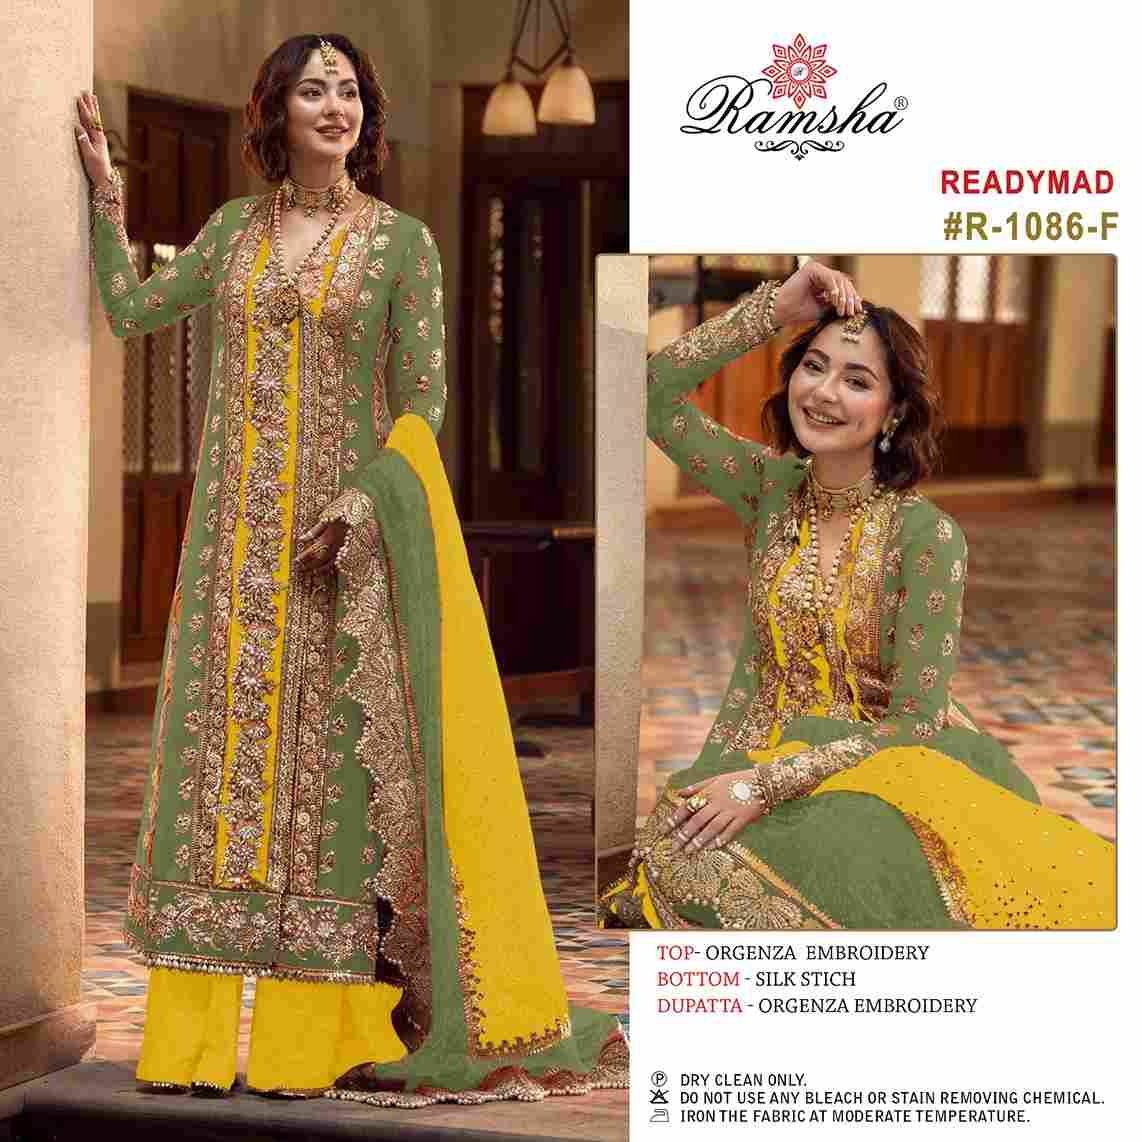 Ramsha 1086 Colours Vol-2 By Ramsha 1086-E To 1086-H Series Beautiful Pakistani Suits Colorful Stylish Fancy Casual Wear & Ethnic Wear Organza Embroidered Dresses At Wholesale Price